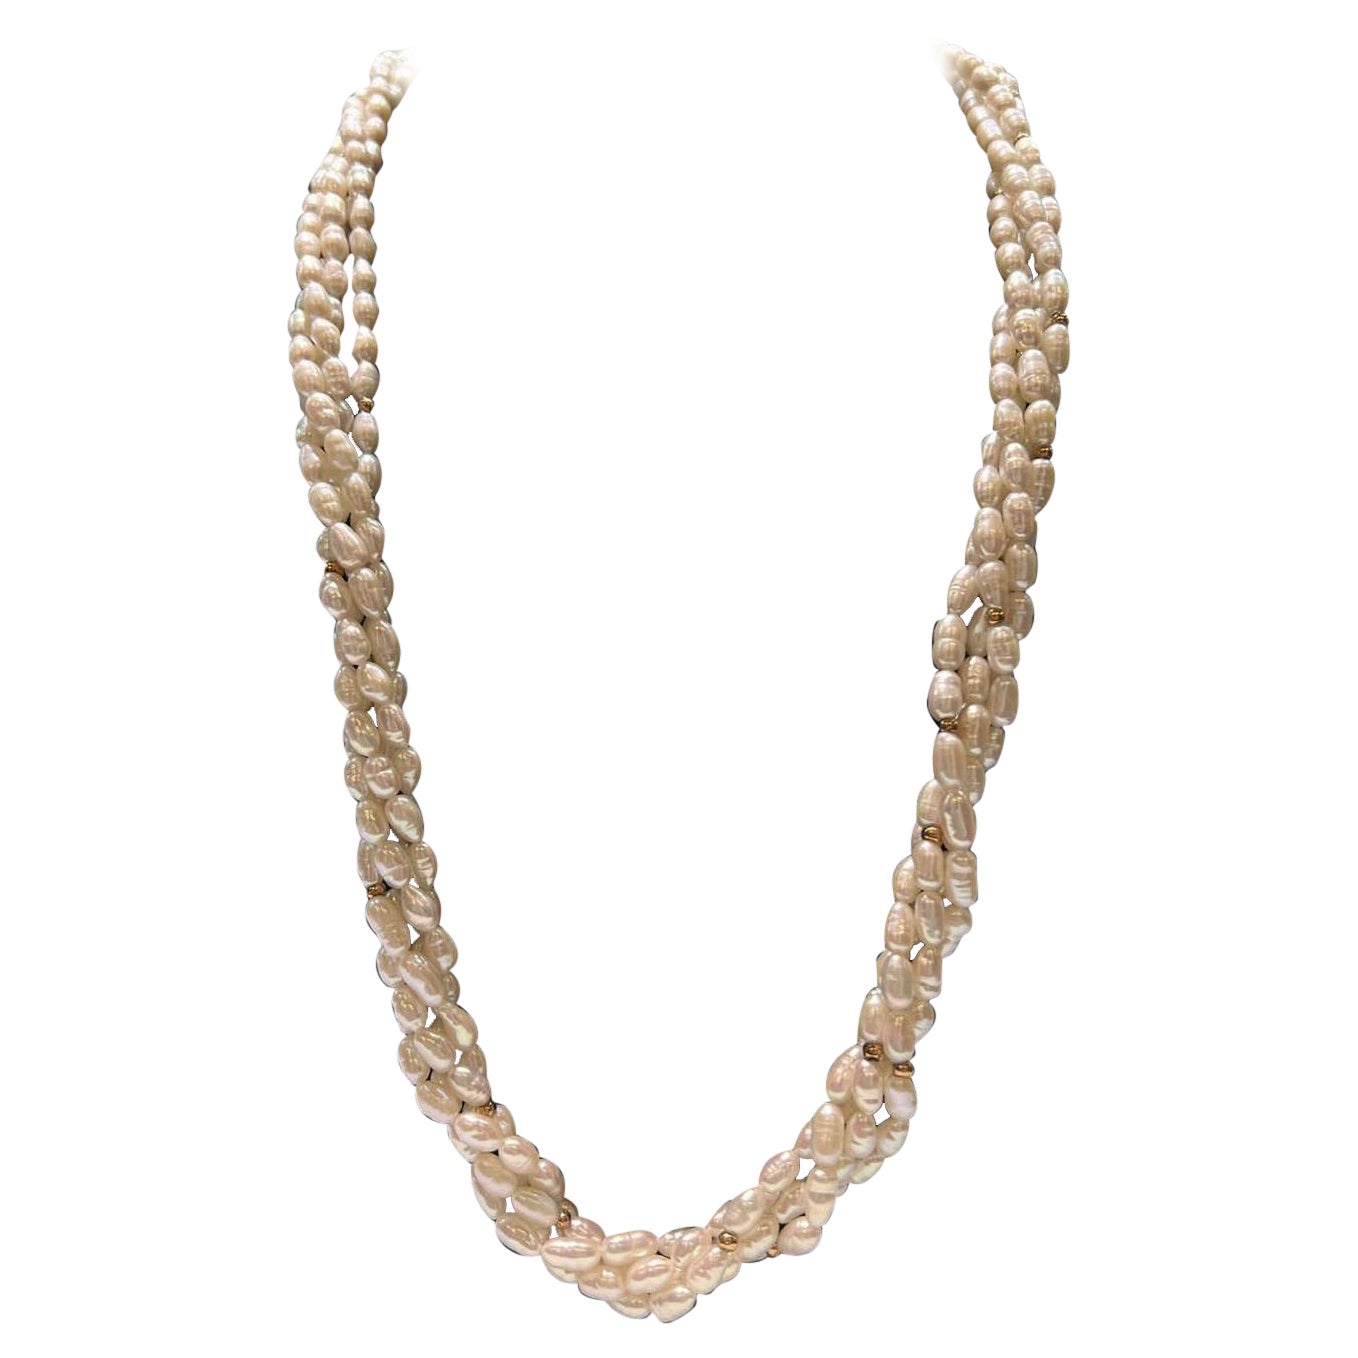 4 Strand Freshwater Pearls with 14k Yellow Gold Clasp